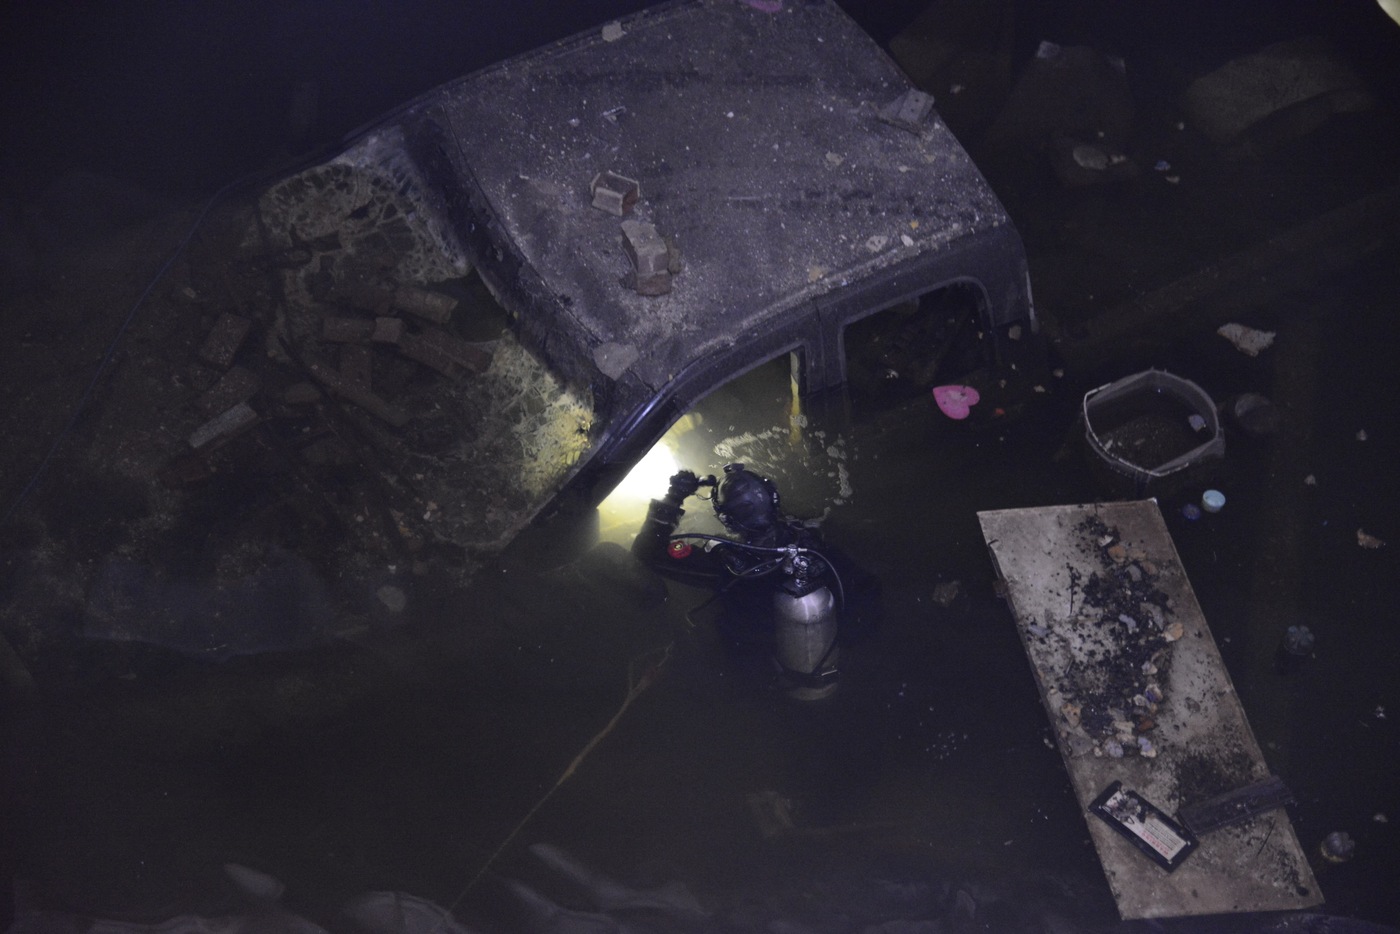 This sunken truck from a search in Philadelphia may hold key pieces of evidence to help solve a crime.